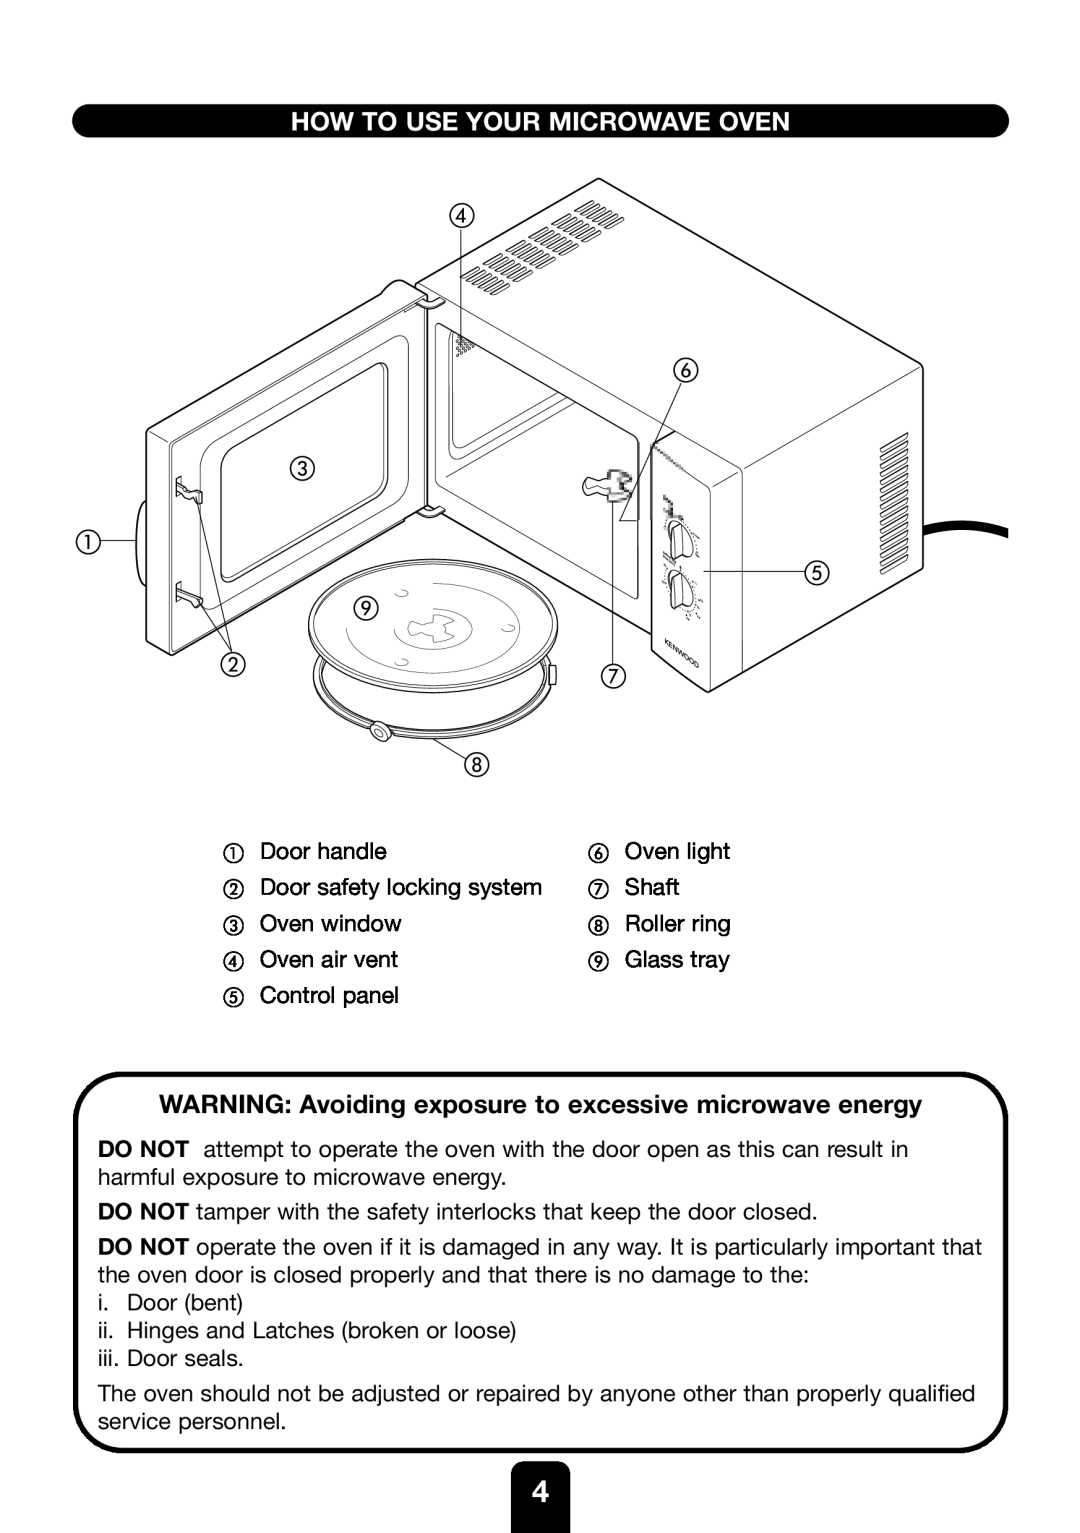 Kenwood MW430M manual How To Use Your Microwave Oven, WARNING Avoiding exposure to excessive microwave energy 